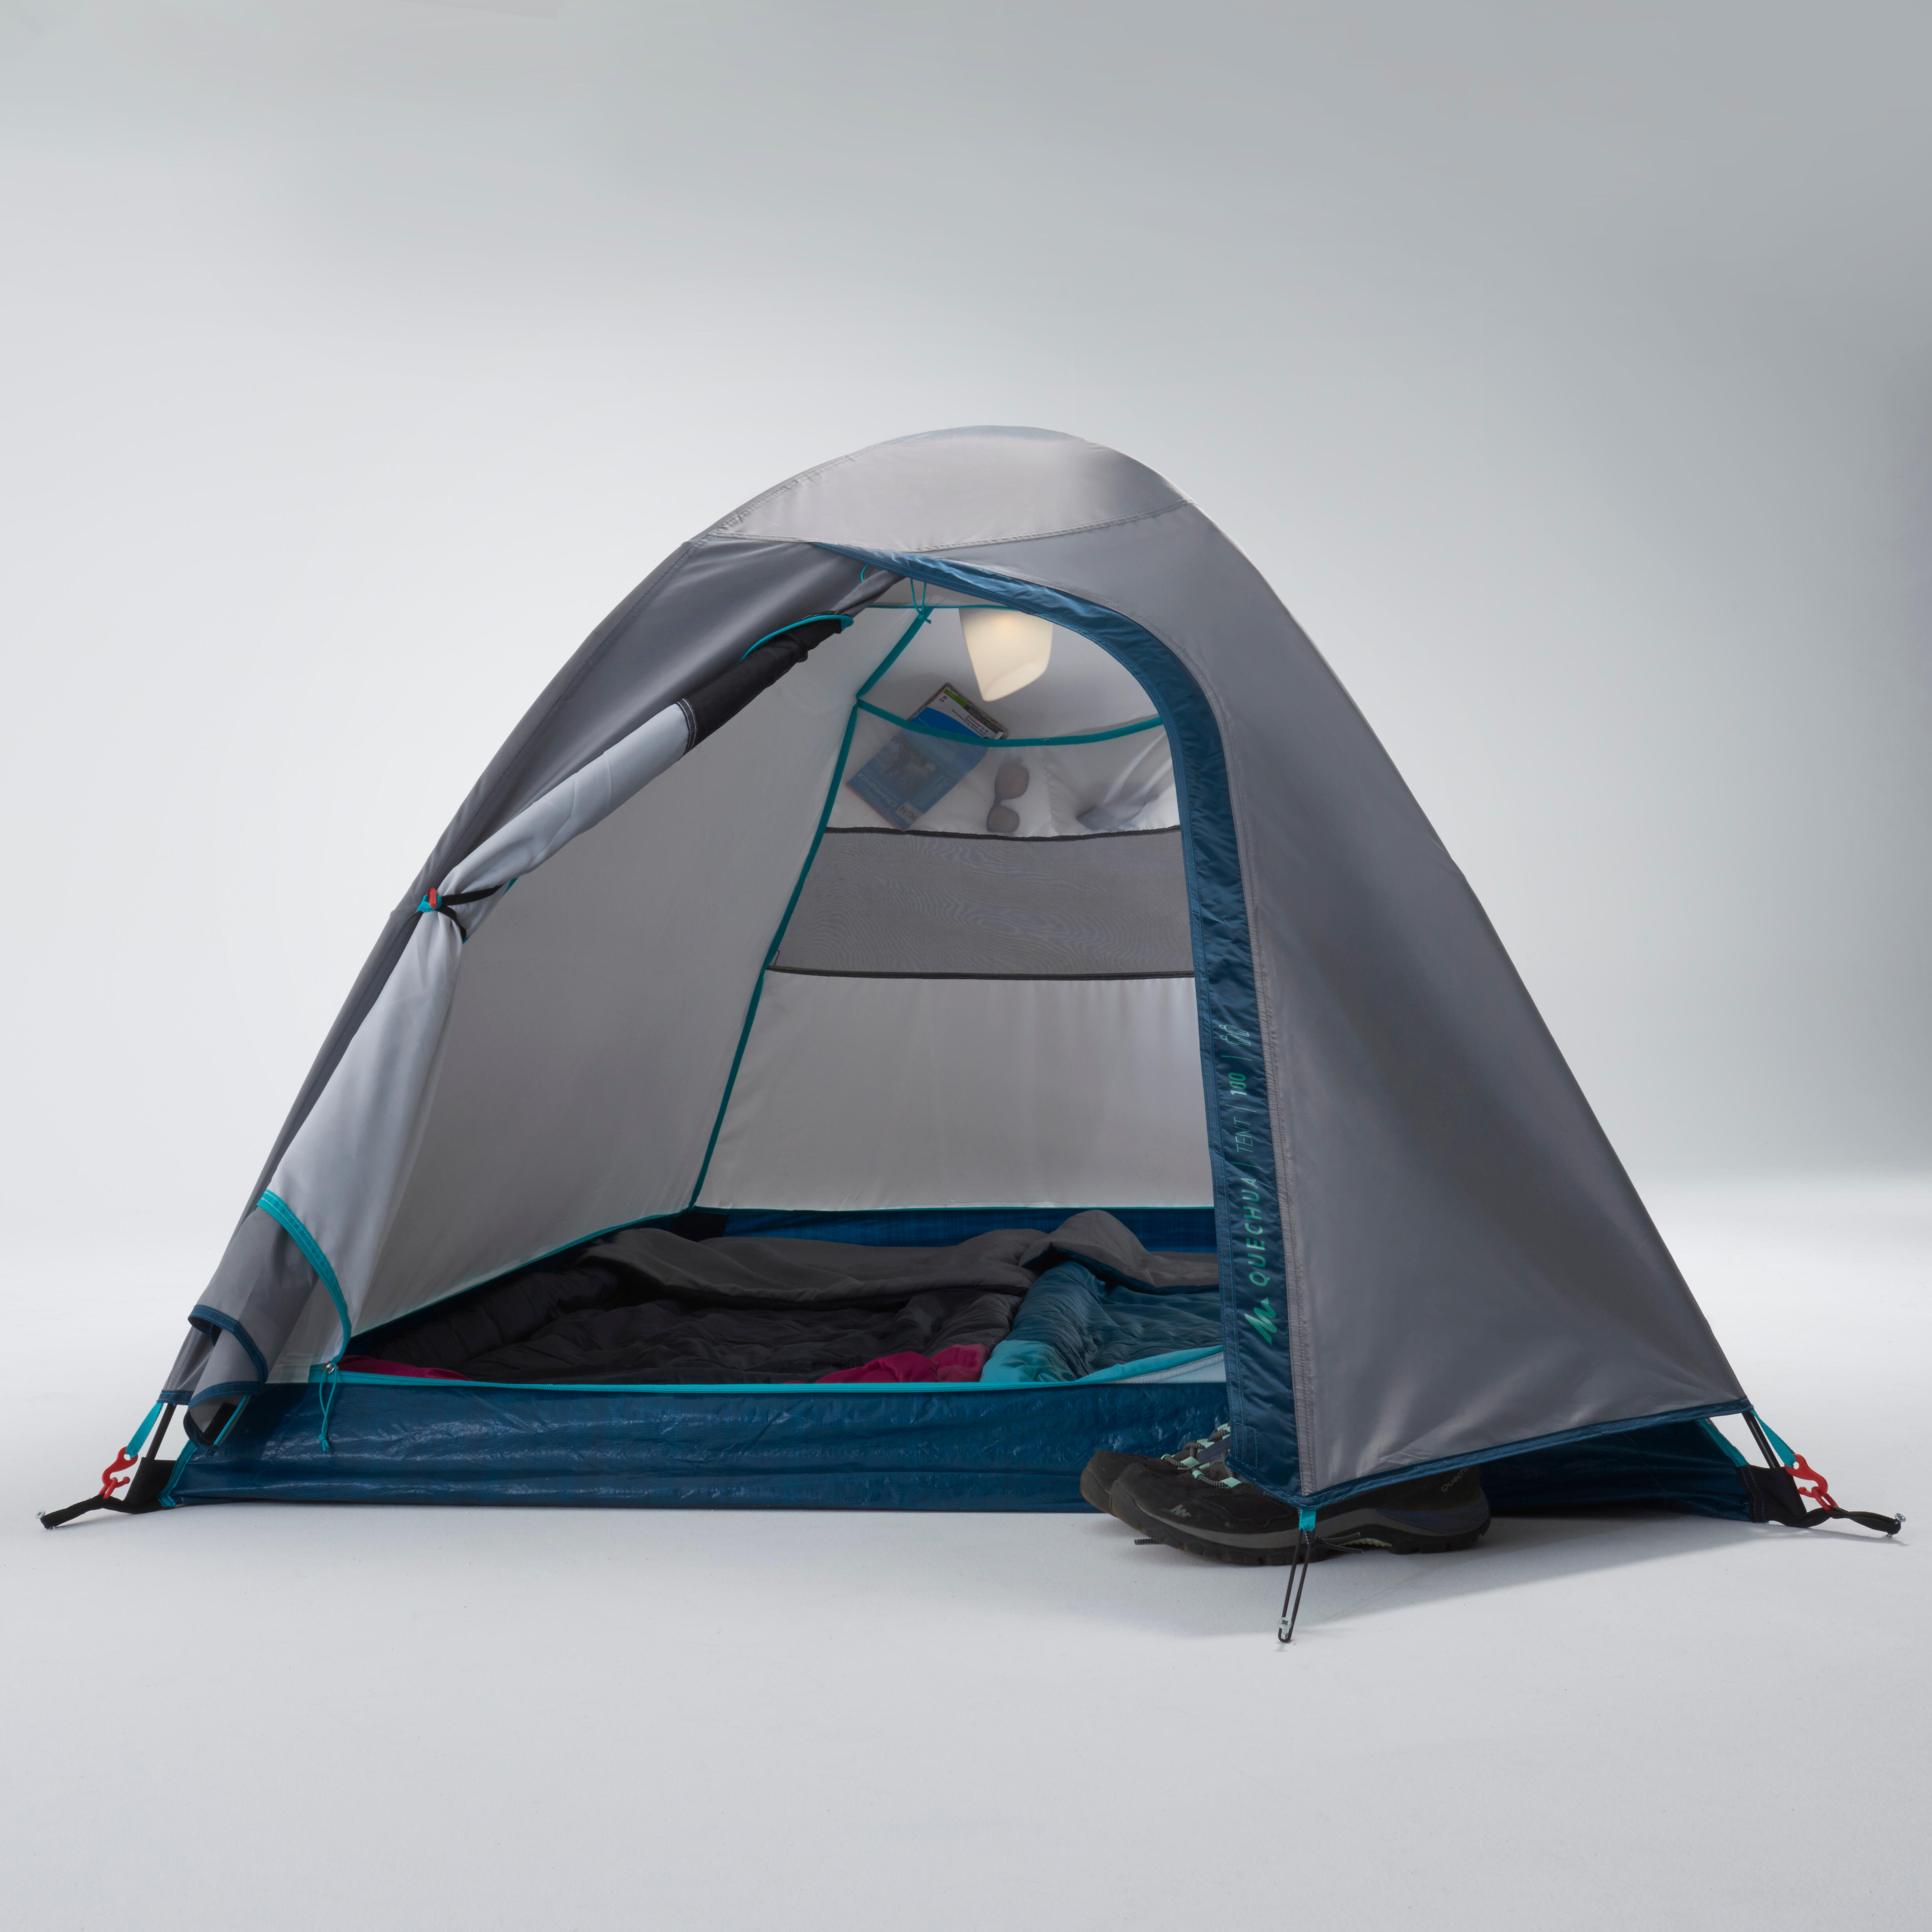 CAMPING TENT MH100 - 2 PEOPLE